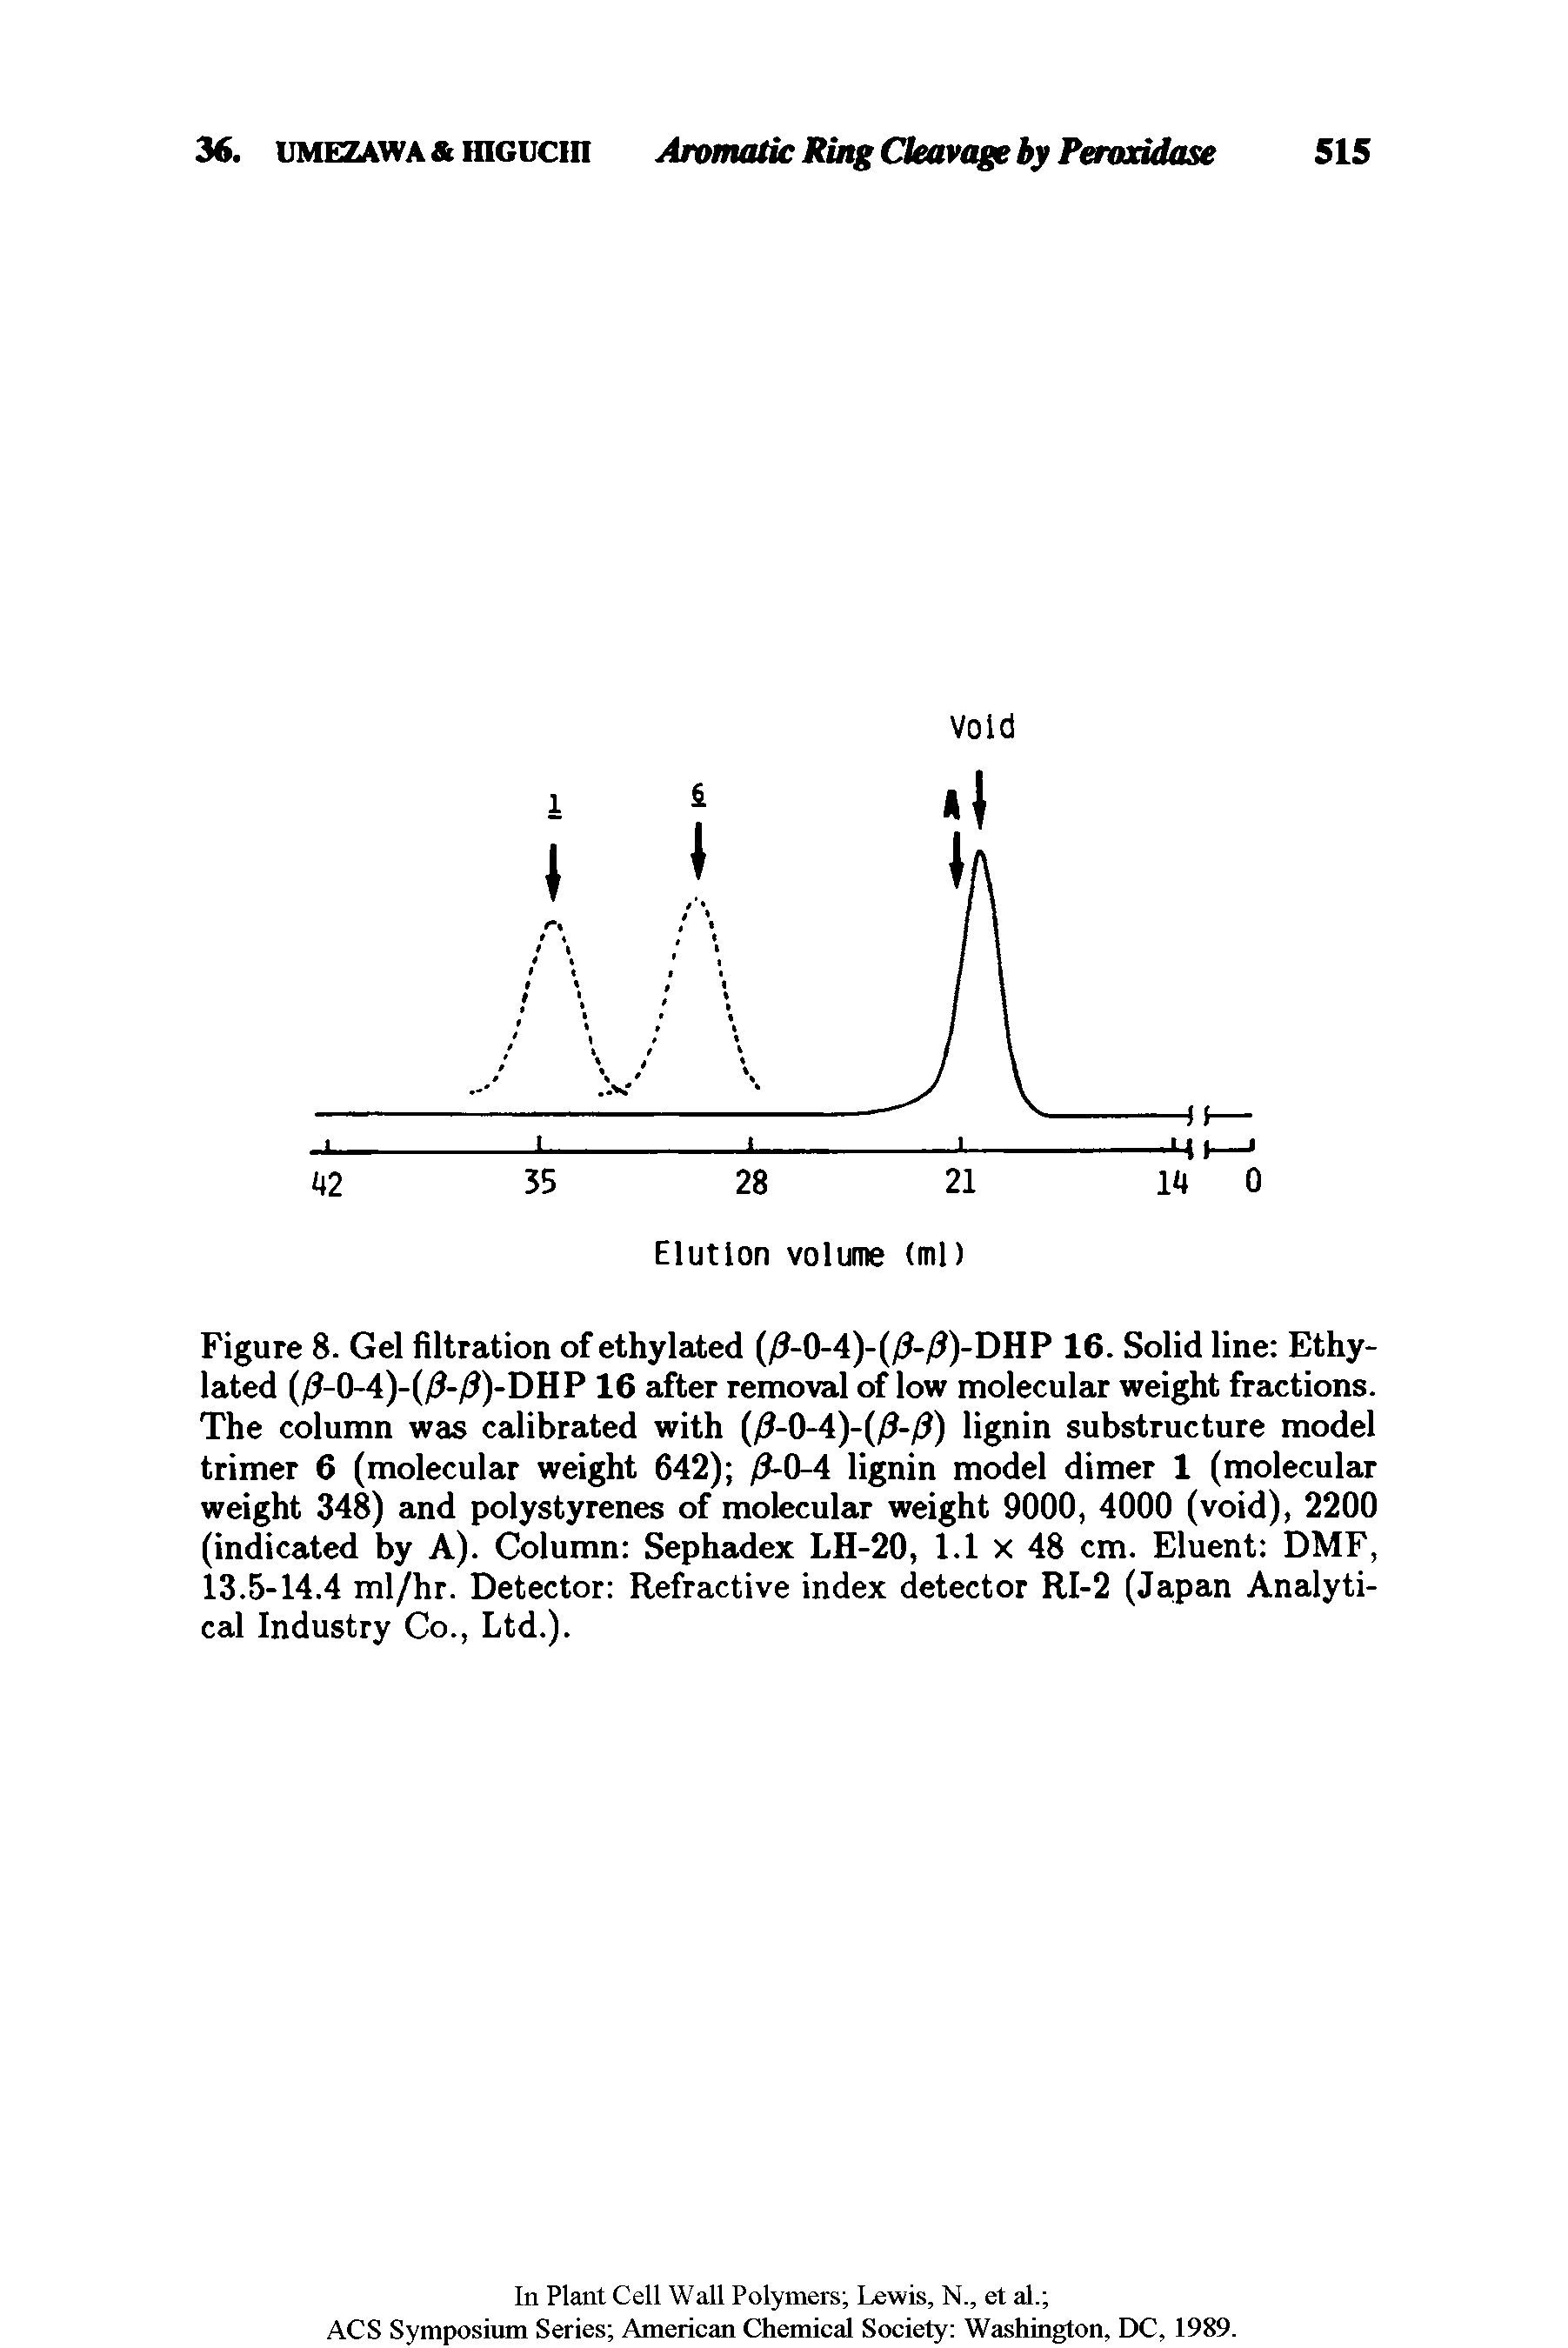 Figure 8. Gel filtration of ethylated (/ -0-4)-(/ -/ )-DHP 16. Solid line Ethylated (/ -0-4)-(/ -/ )-DHP 16 after removal of low molecular weight fractions. The column was calibrated with (/ -0-4)-(/ -/ ) lignin substructure model trimer 6 (molecular weight 642) /3-0-4 lignin model dimer 1 (molecular weight 348) and polystyrenes of molecular weight 9000, 4000 (void), 2200 (indicated by A). Column Sephadex LH-20, 1.1 x 48 cm. Eluent DMF, 13.5-14.4 ml/hr. Detector Refractive index detector RI-2 (Japan Analytical Industry Co., Ltd.).